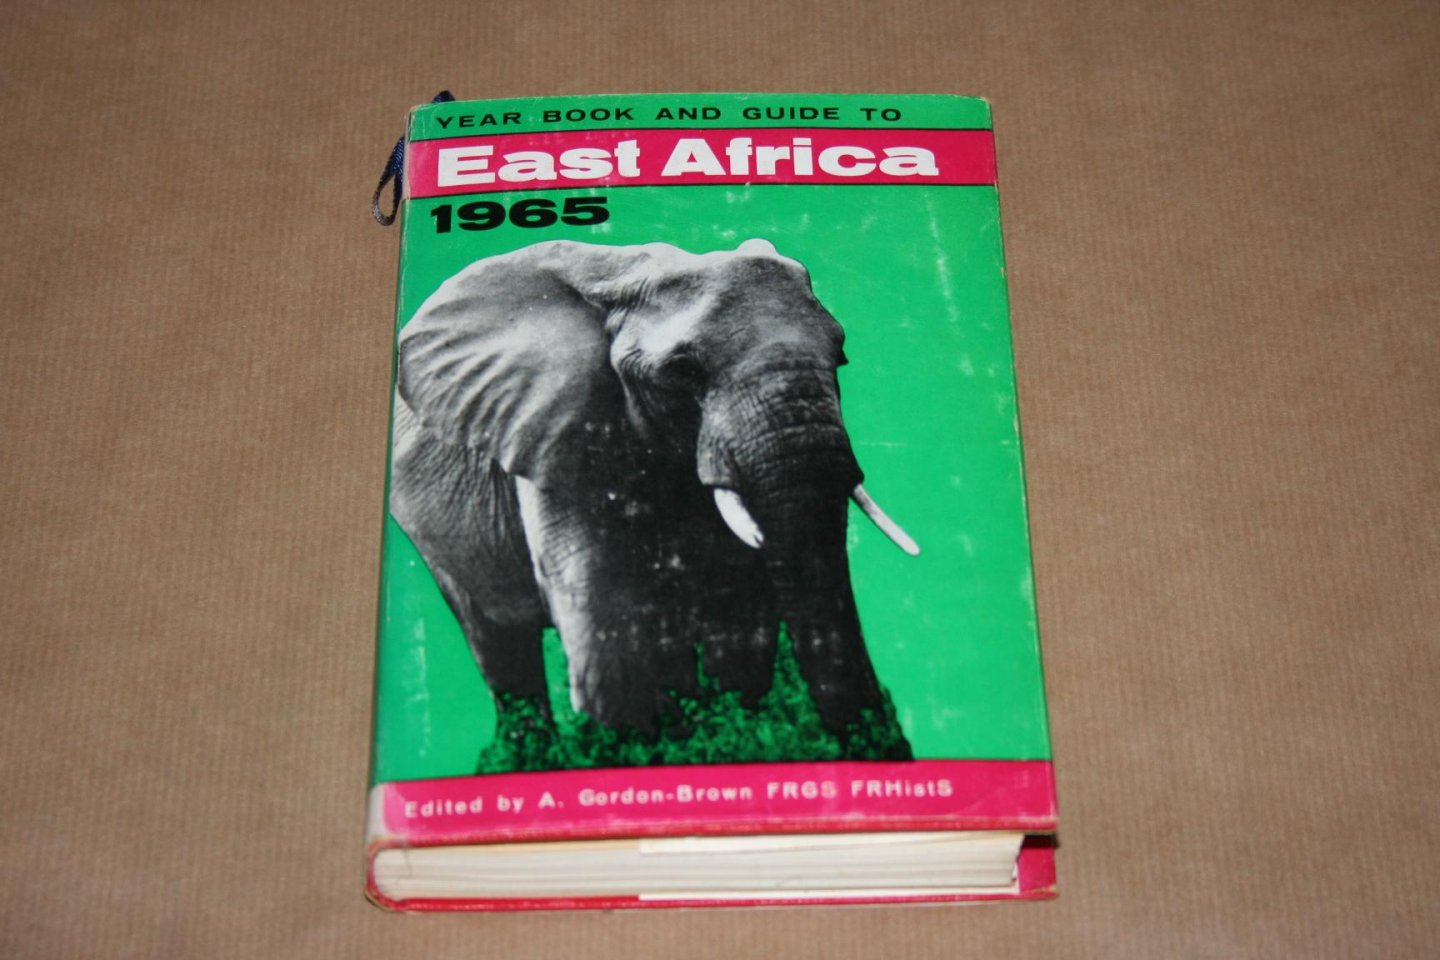 A. Gordon-Brown - Yearbook and guide to East Africa - 1965